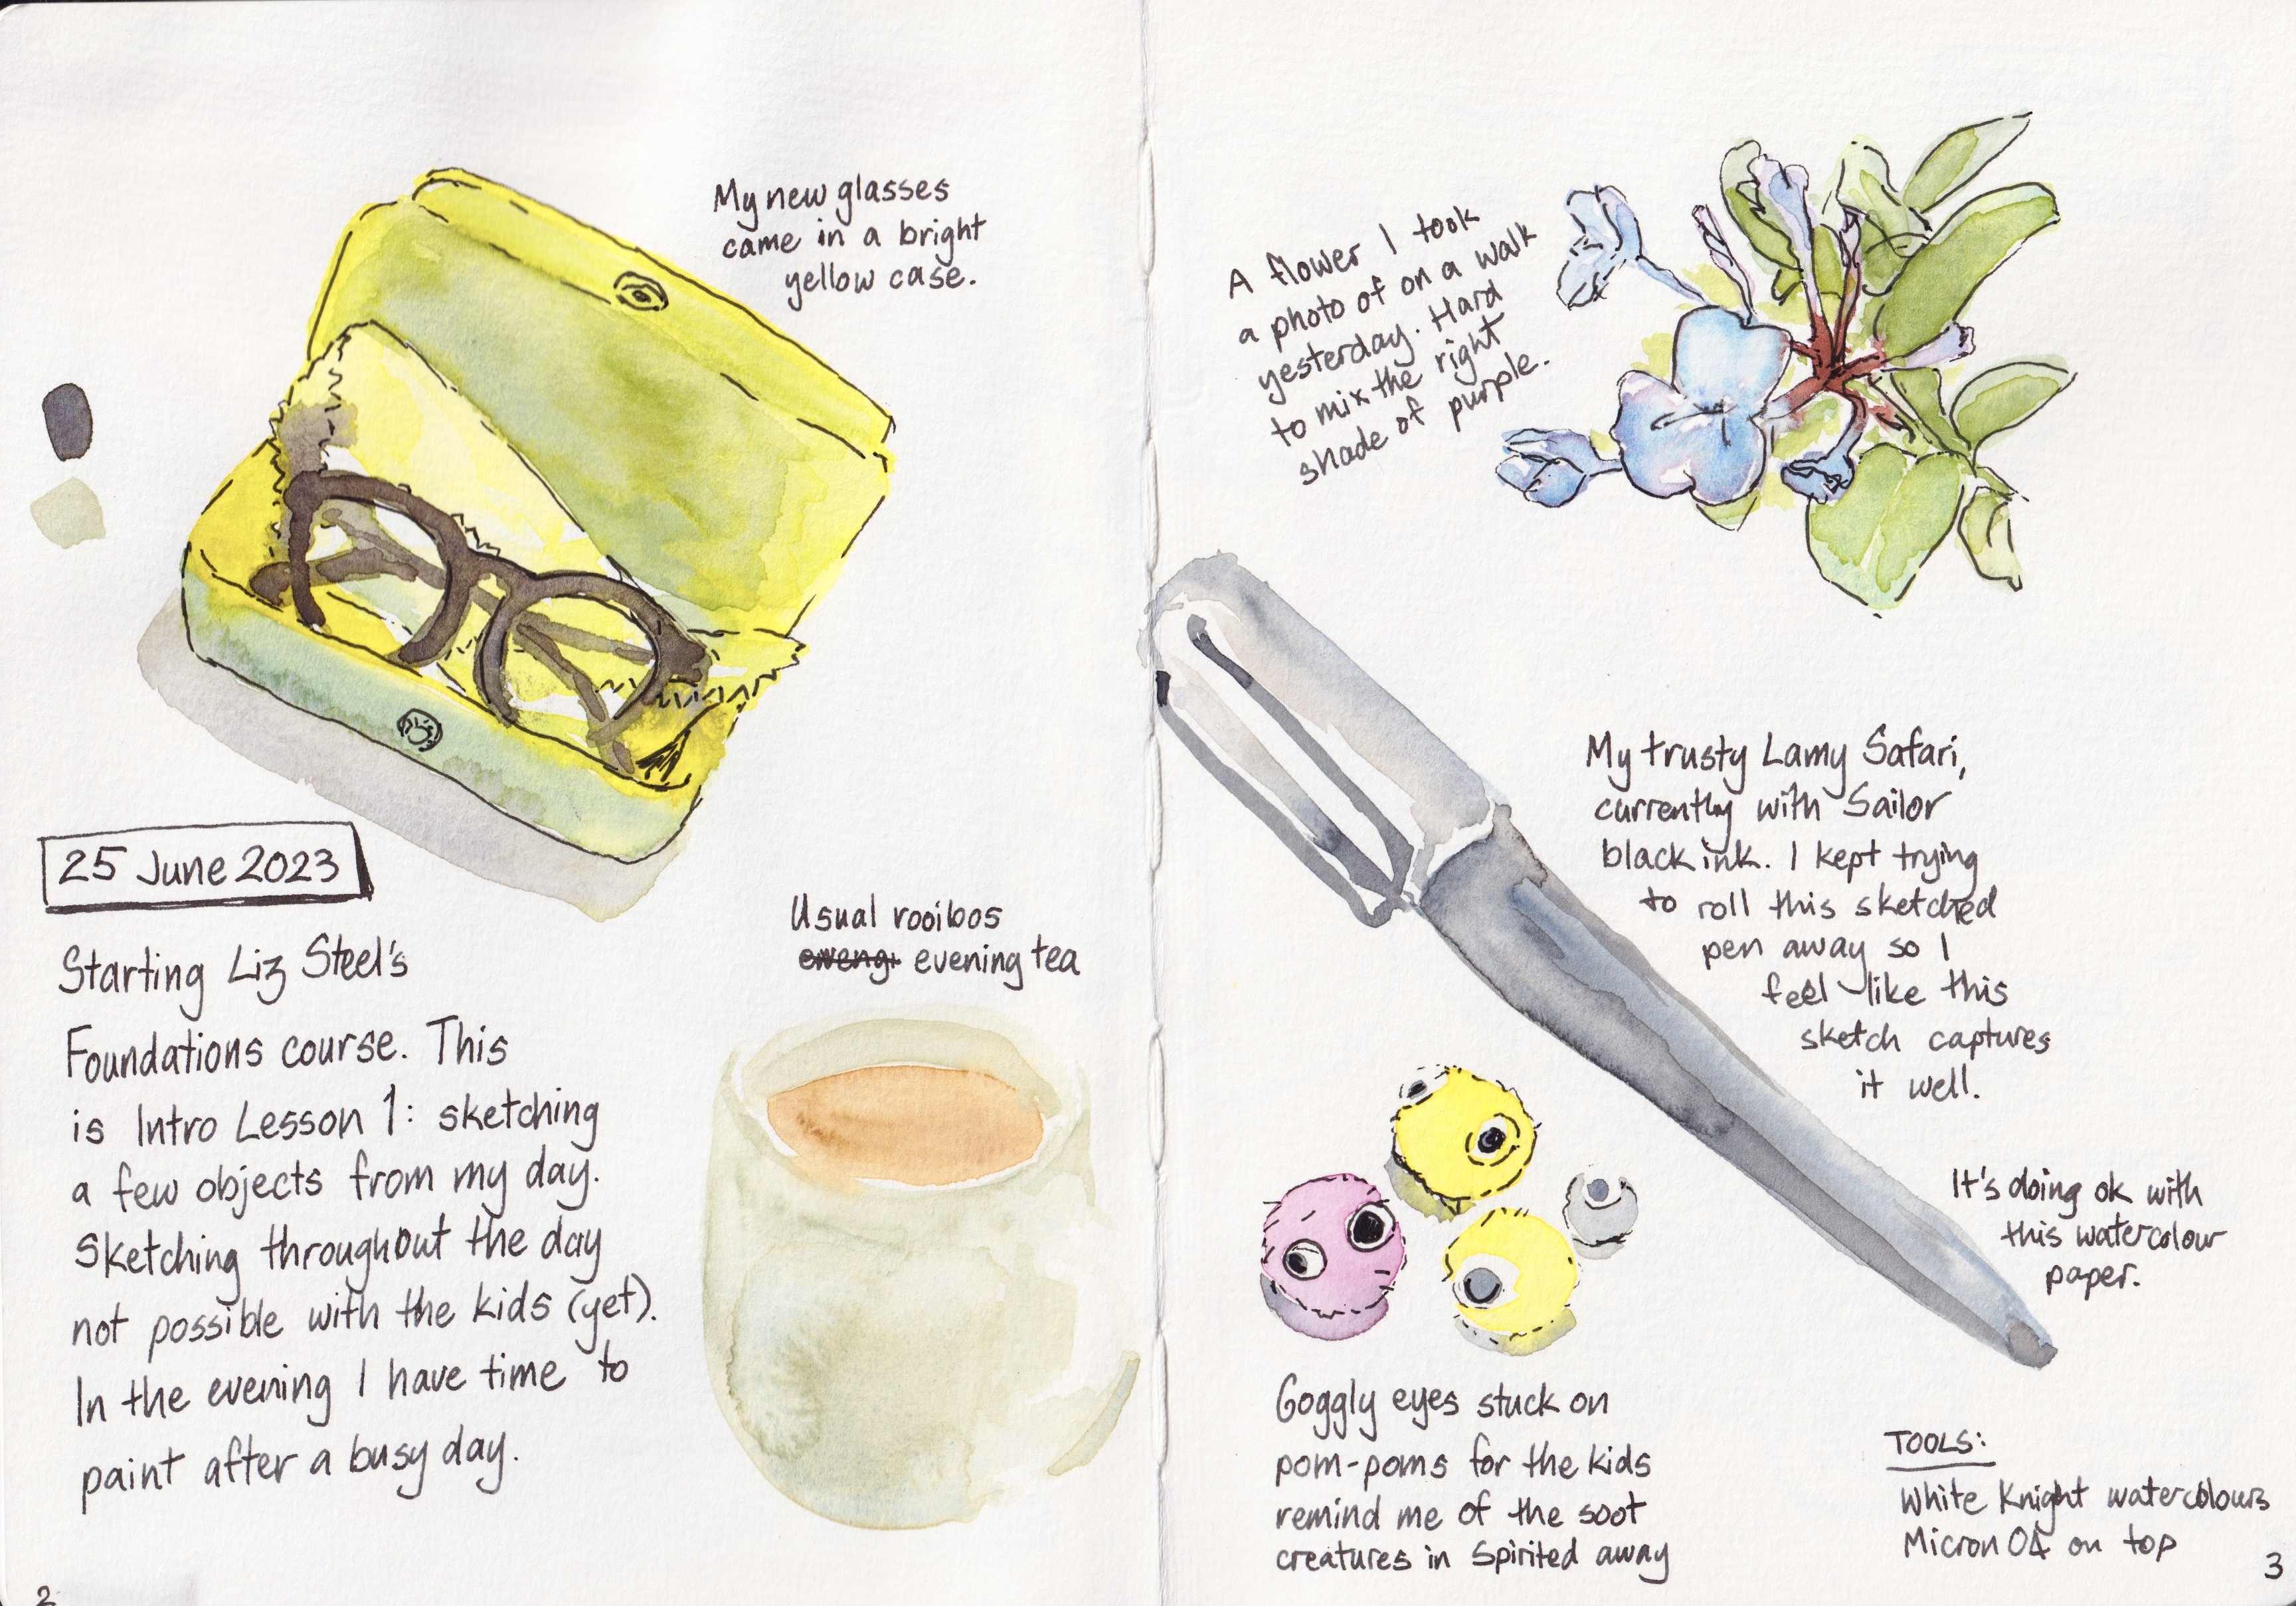 sketchbook2 2.jpeg|sketching objects in my house